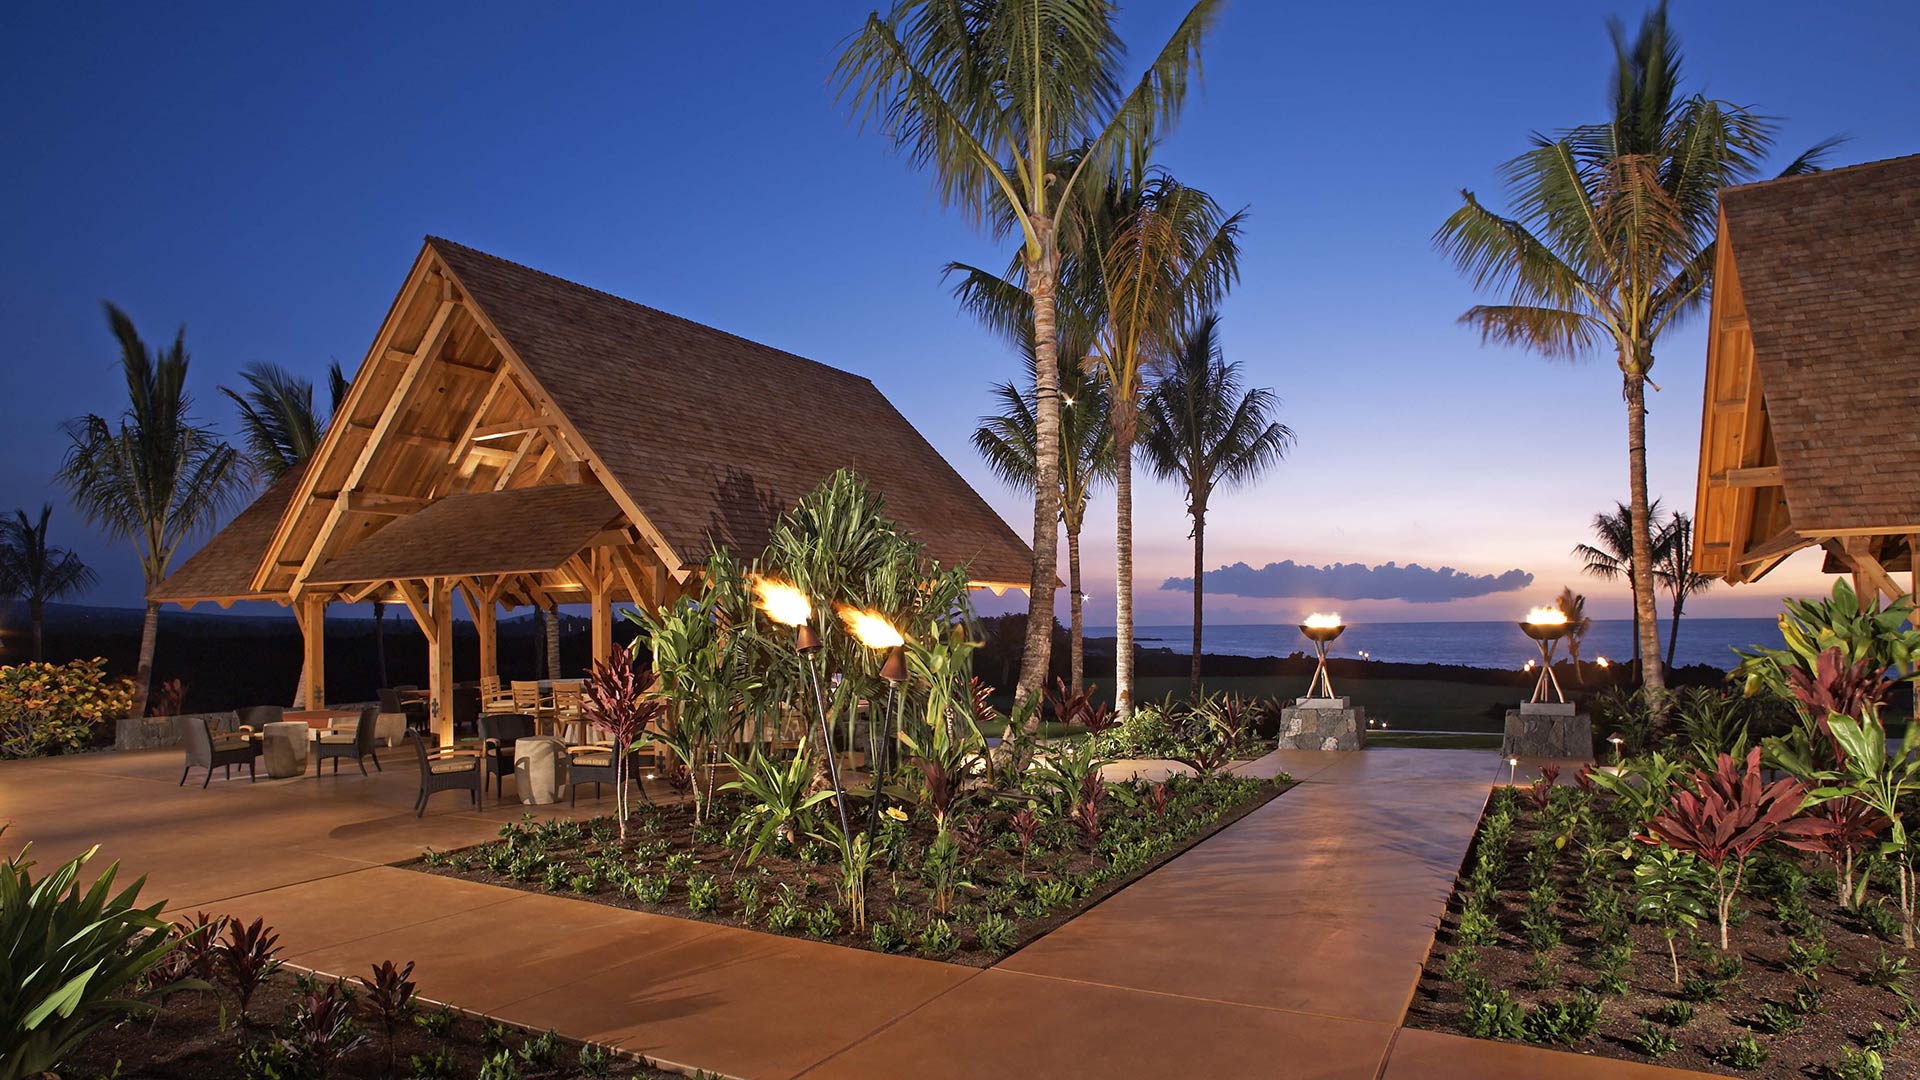 The luxury Ocean Club for waterfront entertaining, sunset rituals, and Talk Story by starlight